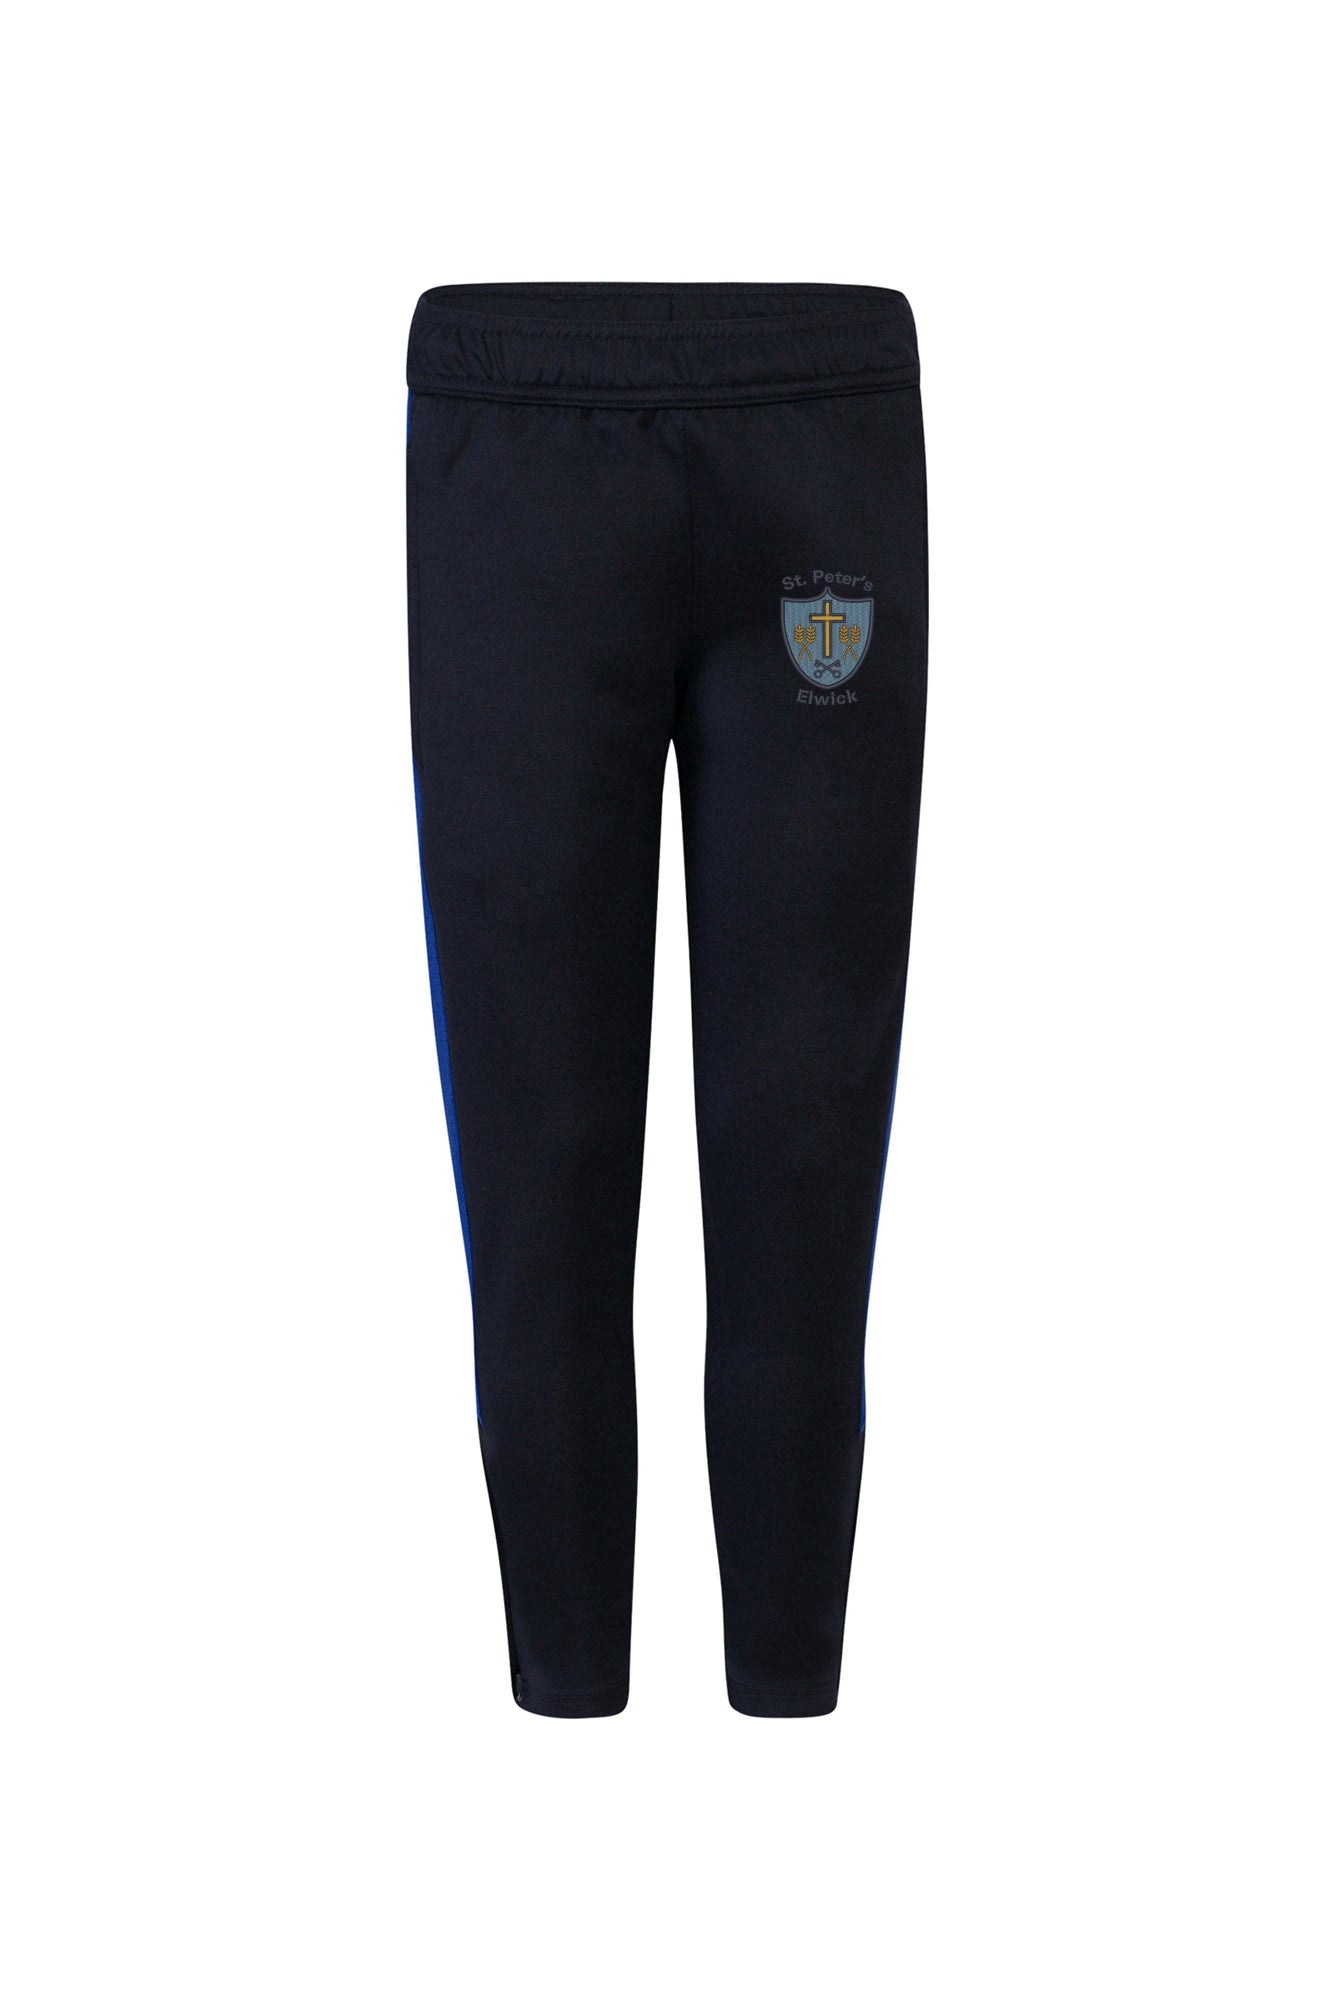 St. Peter's Elwick Navy And Royal Blue Tracksuit Bottoms